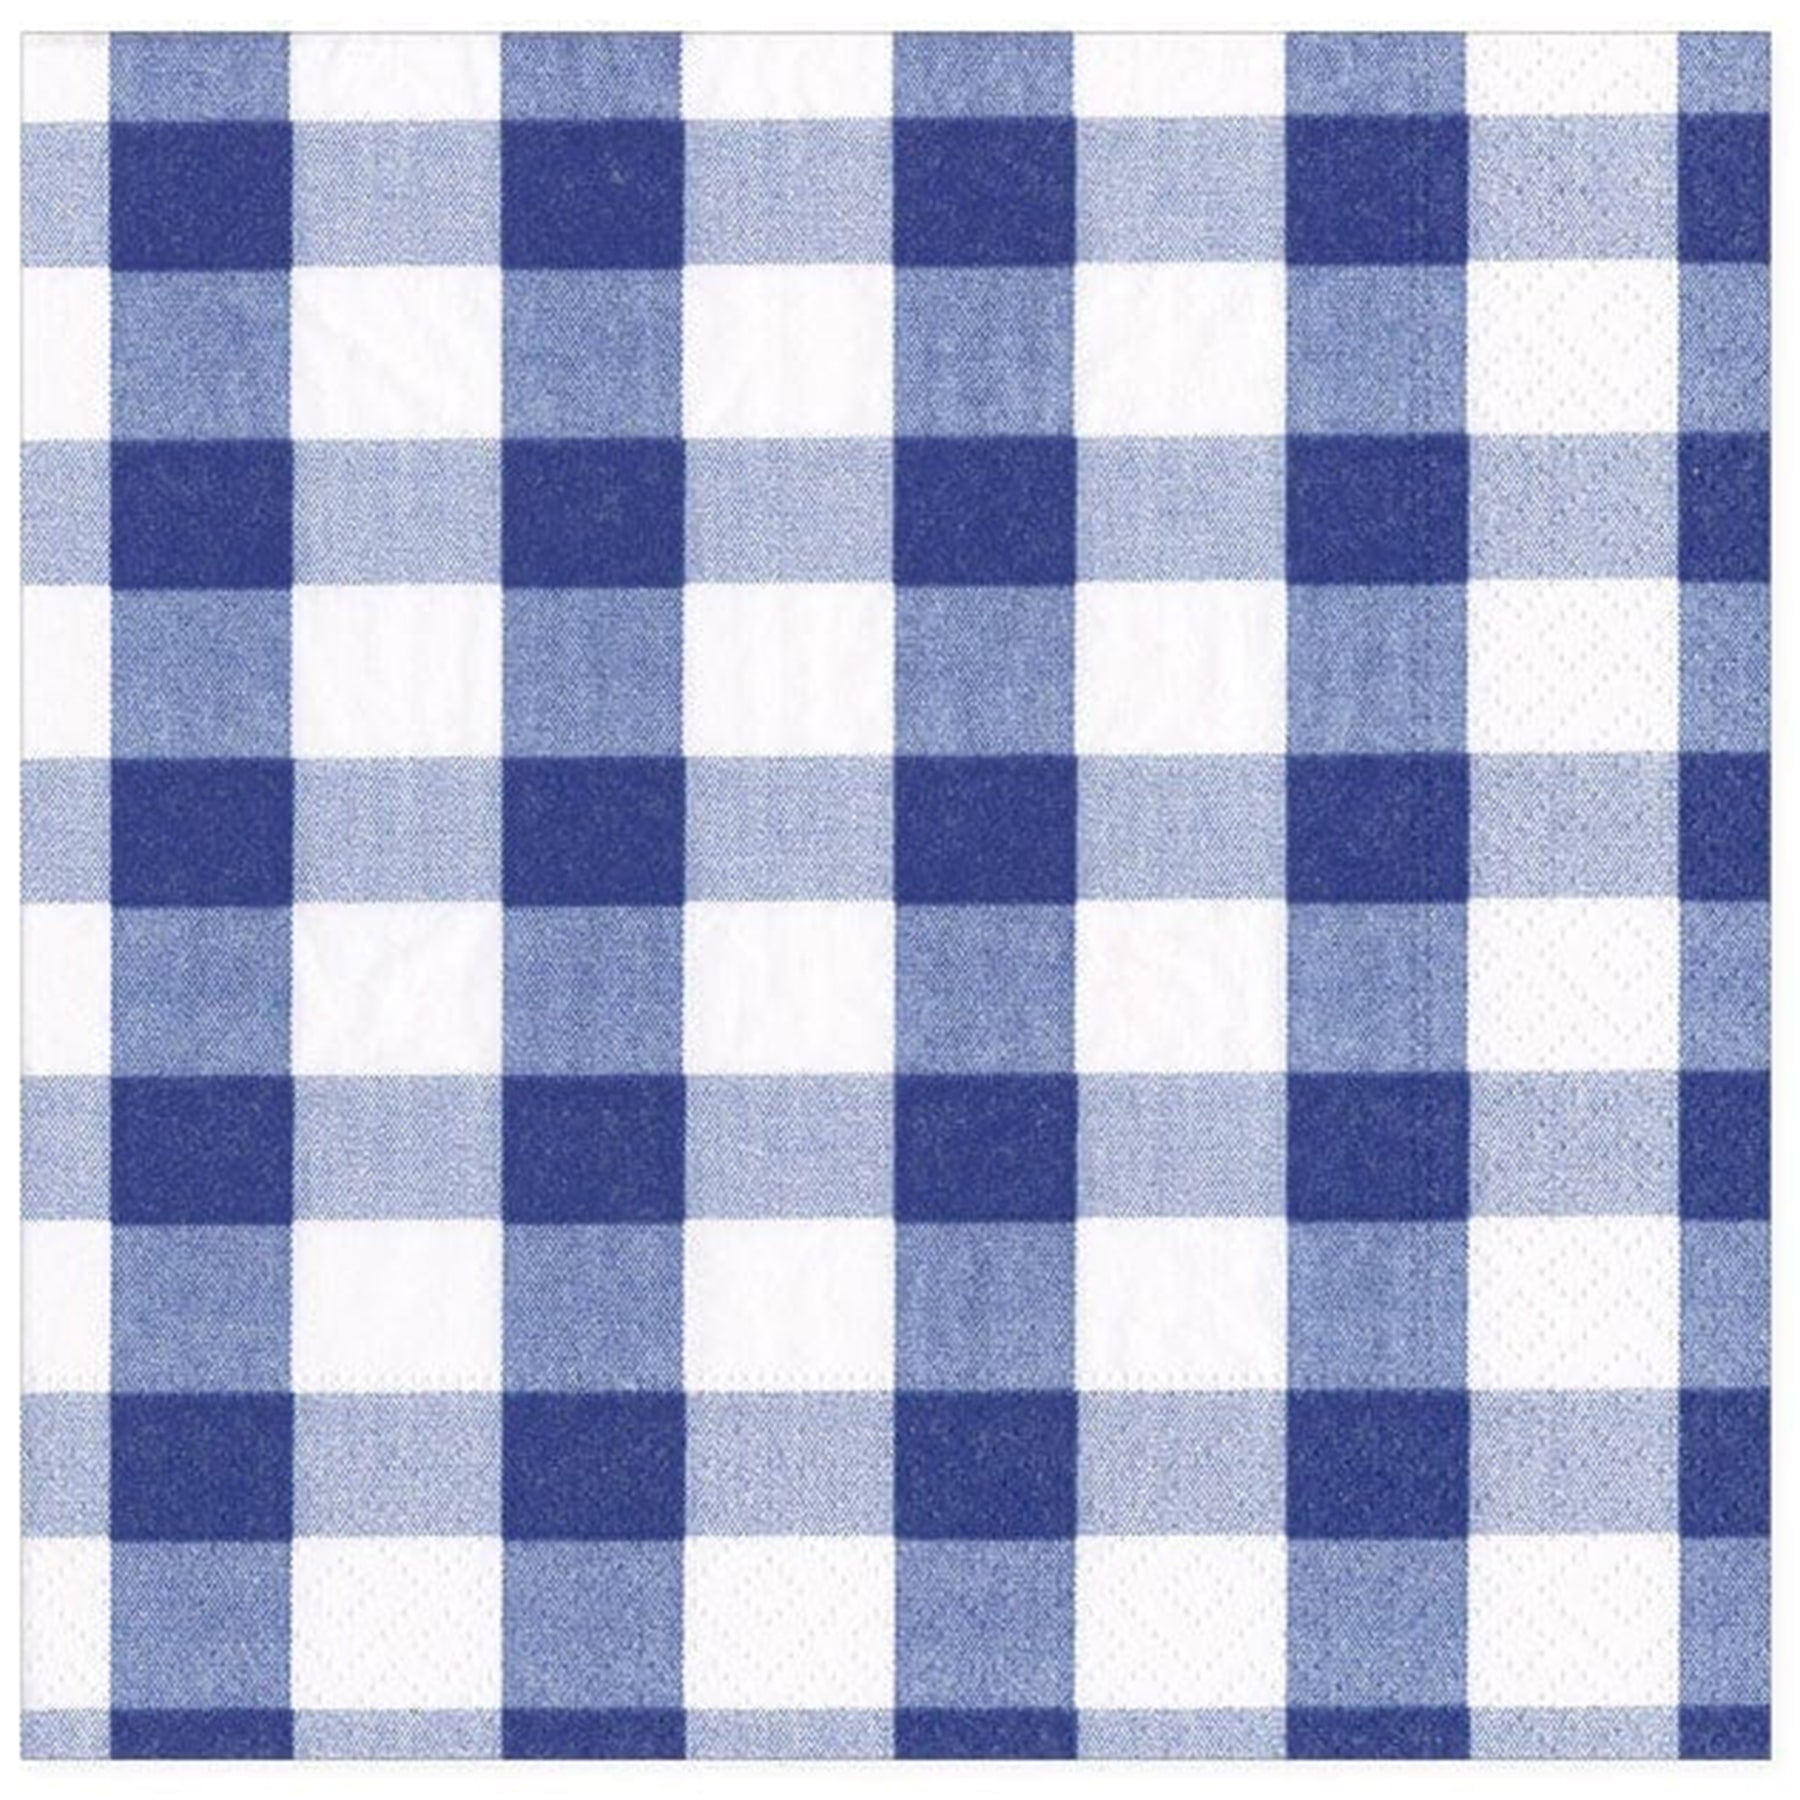 Triple ply Paper napkins with Navy and White Gingham squares